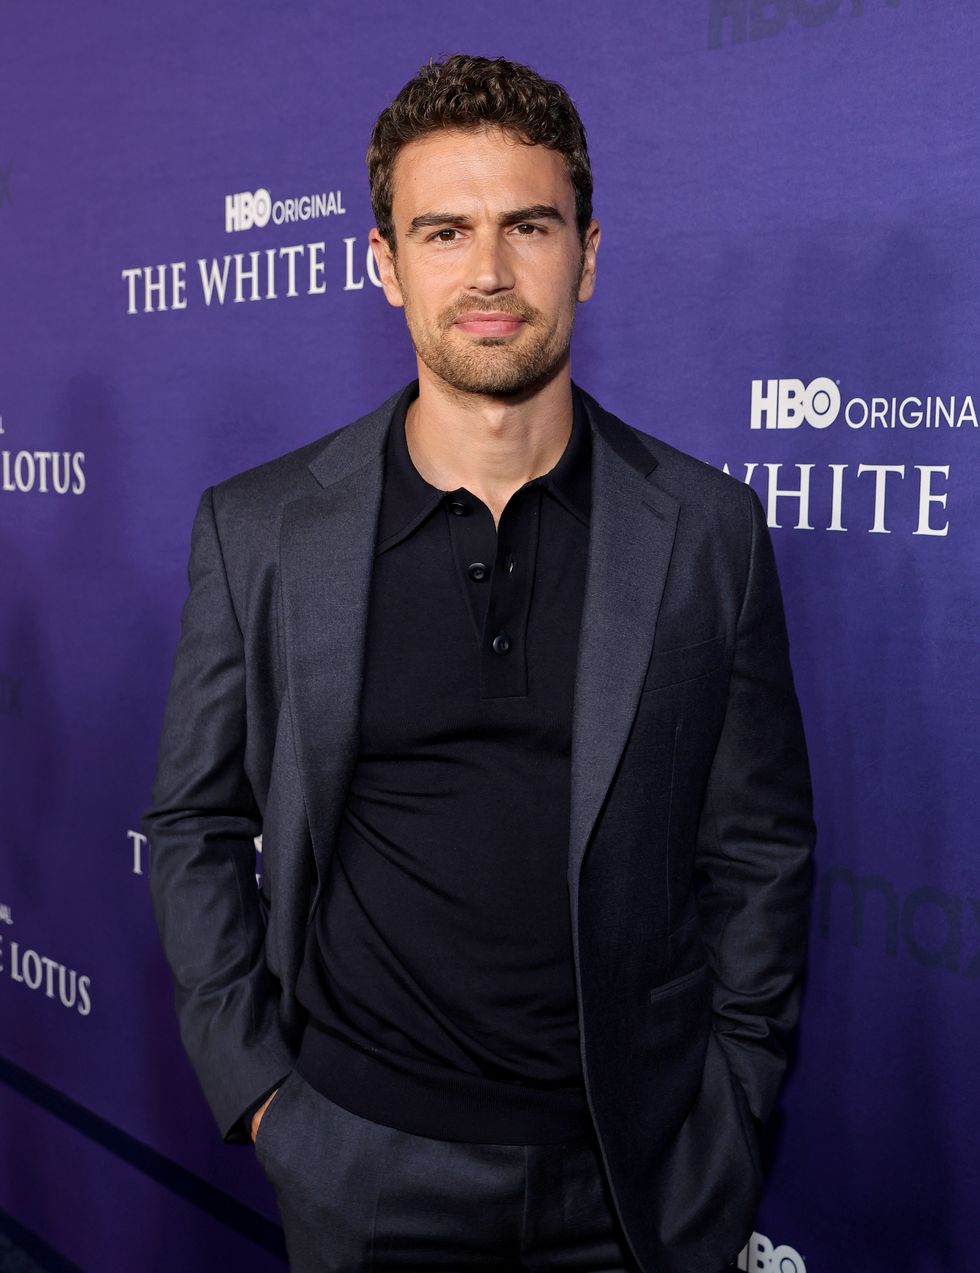 los angeles, california october 20 theo james attends the los angeles season 2 premiere of hbo original series the white lotus at goya studios on october 20, 2022 in los angeles, california photo by matt winkelmeyergathe hollywood reporter via getty images